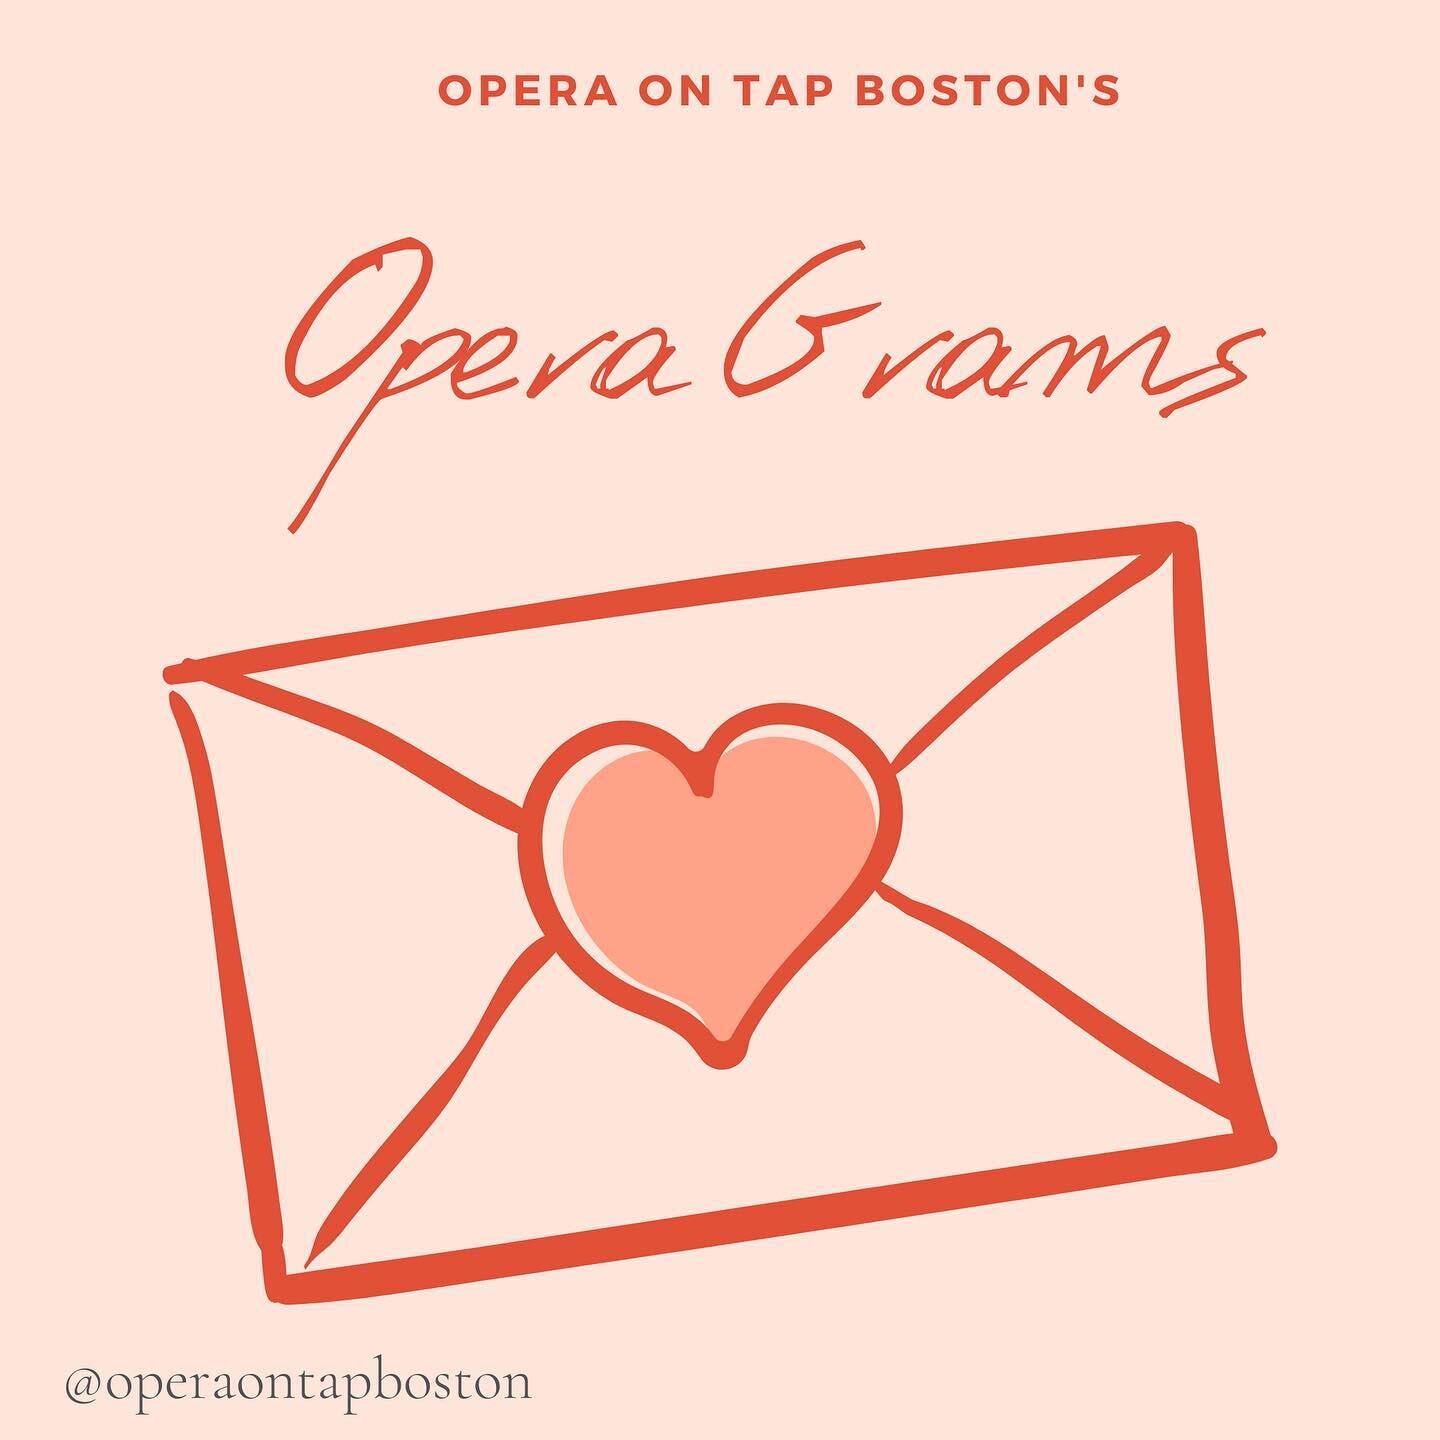 🎶Send an OPERAGRAM to someone special today!📱
.
In these times of social distancing, we&rsquo;d like to offer the next best thing to surprise your friends and loved ones with Operagrams! Our singers will call your loved one and offer a song to brig